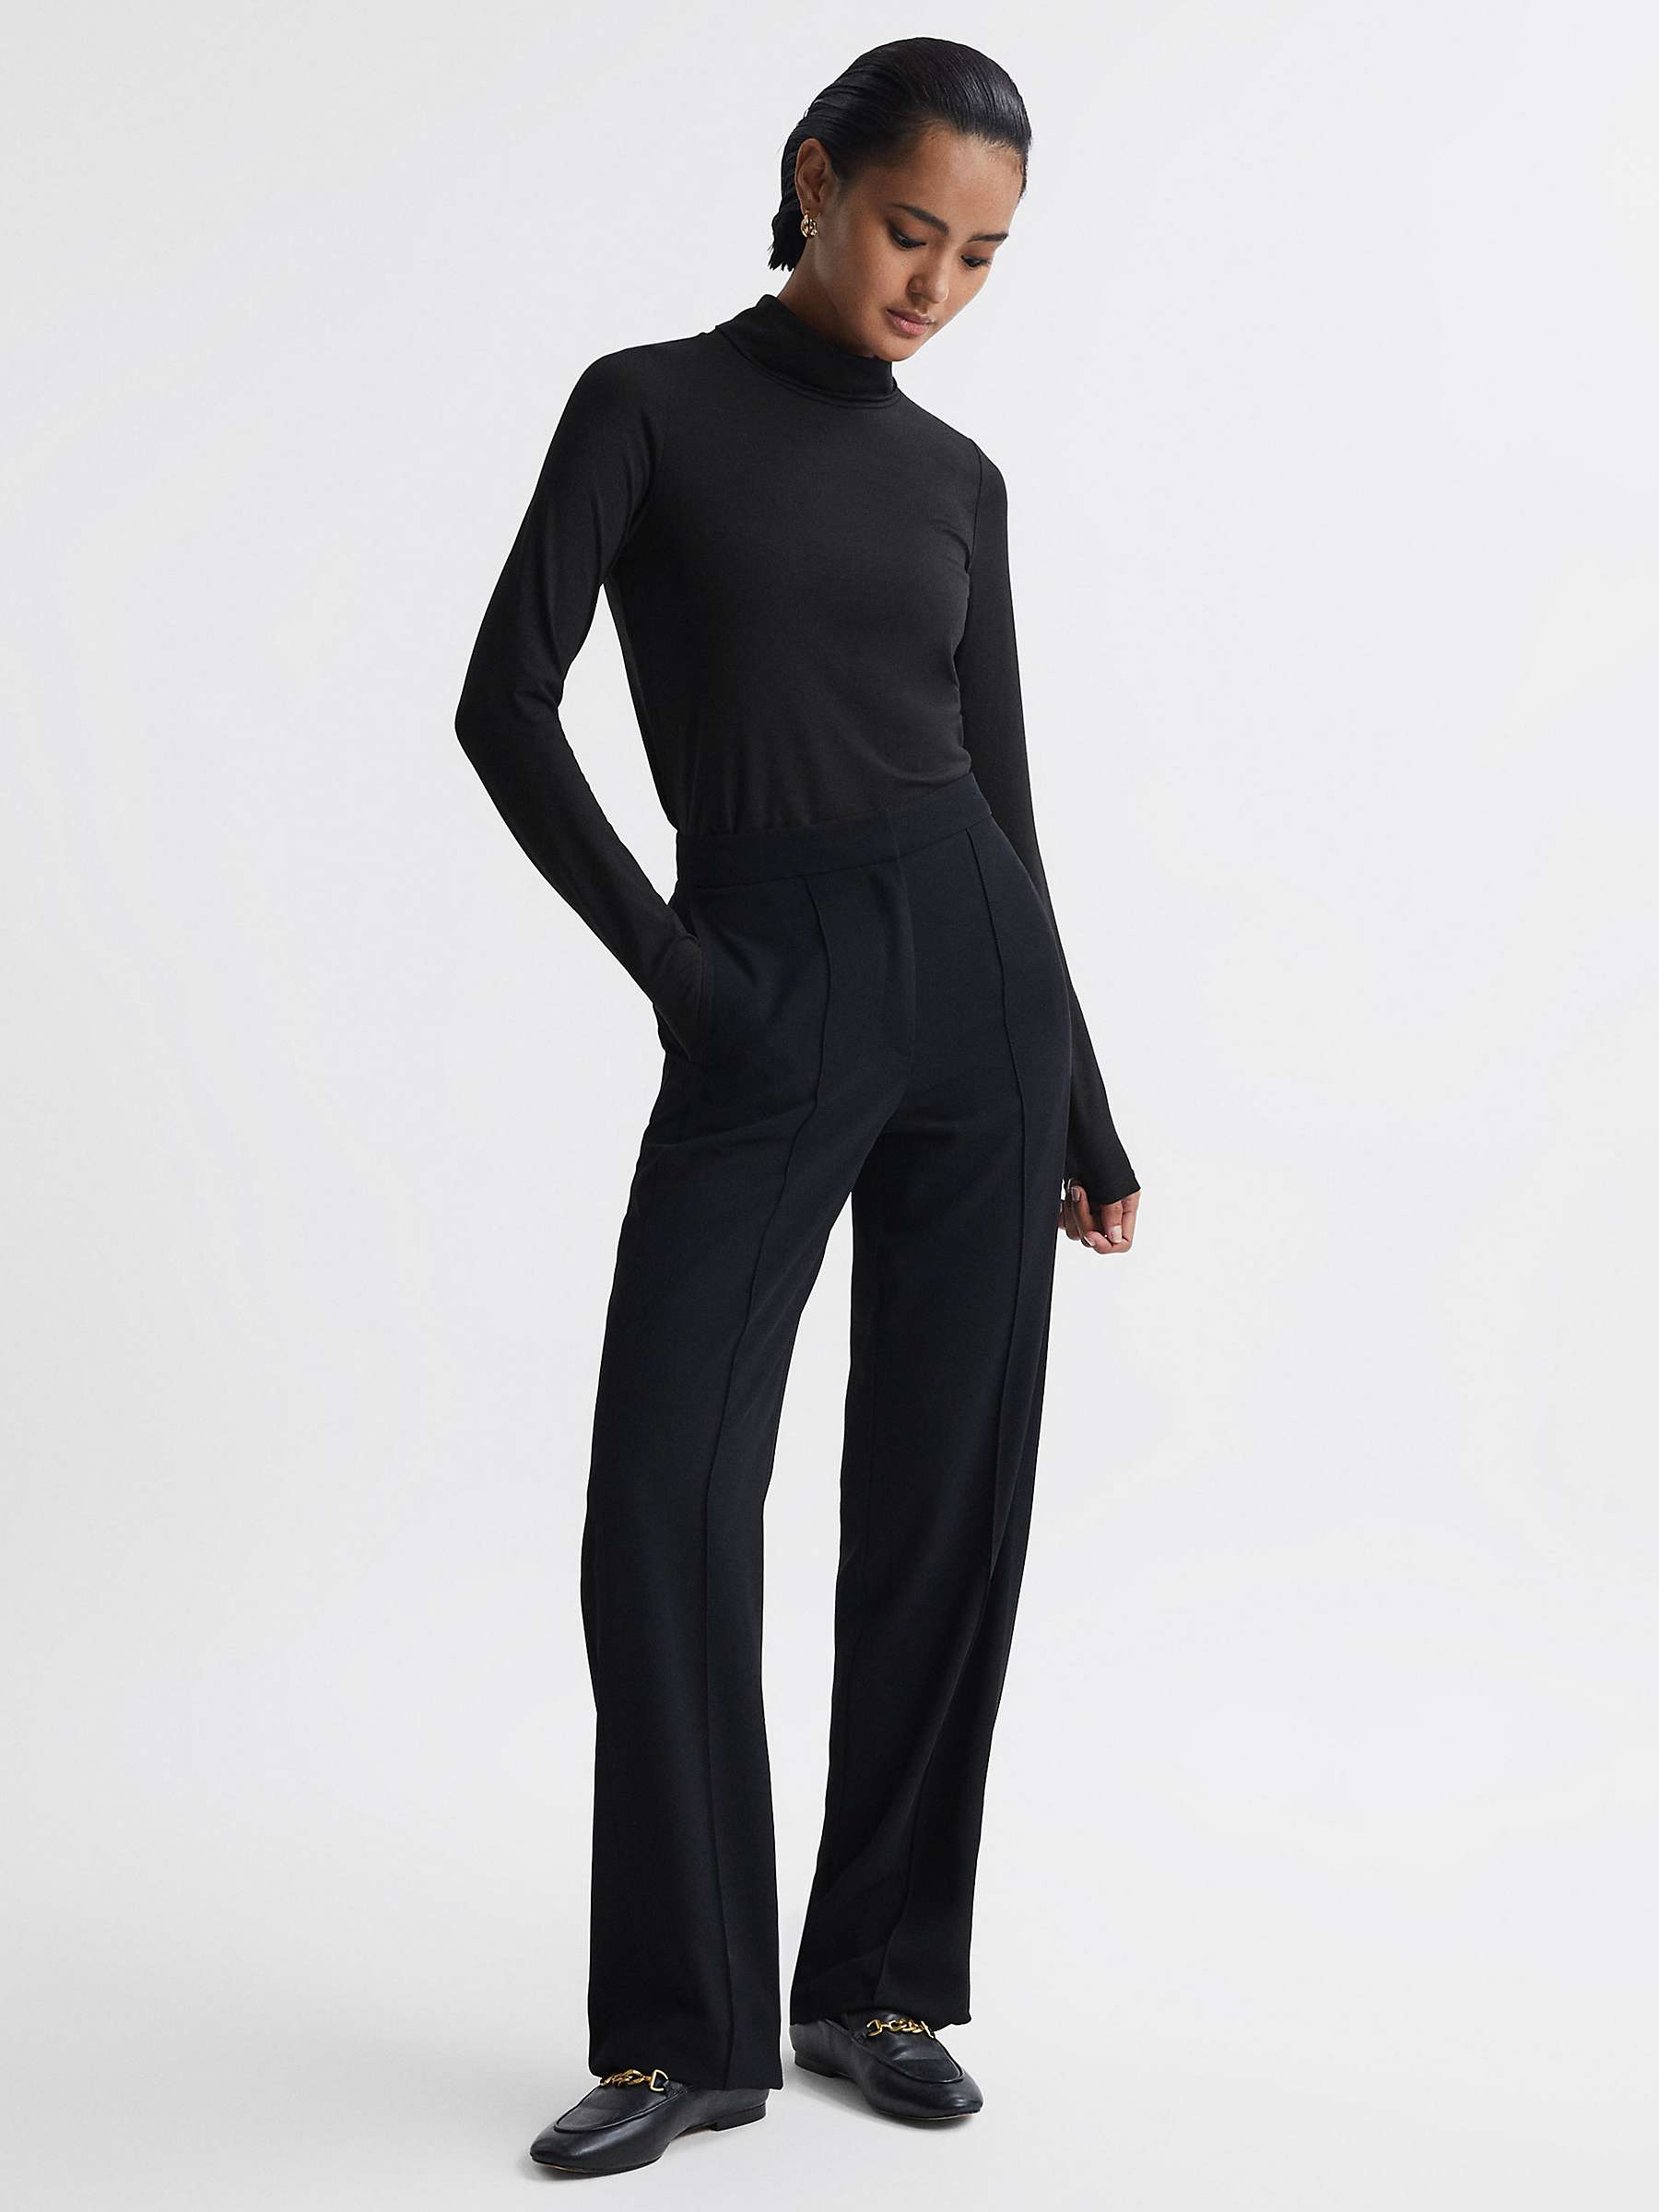 Reiss Piper Fitted Roll Neck Top, Black at John Lewis & Partners